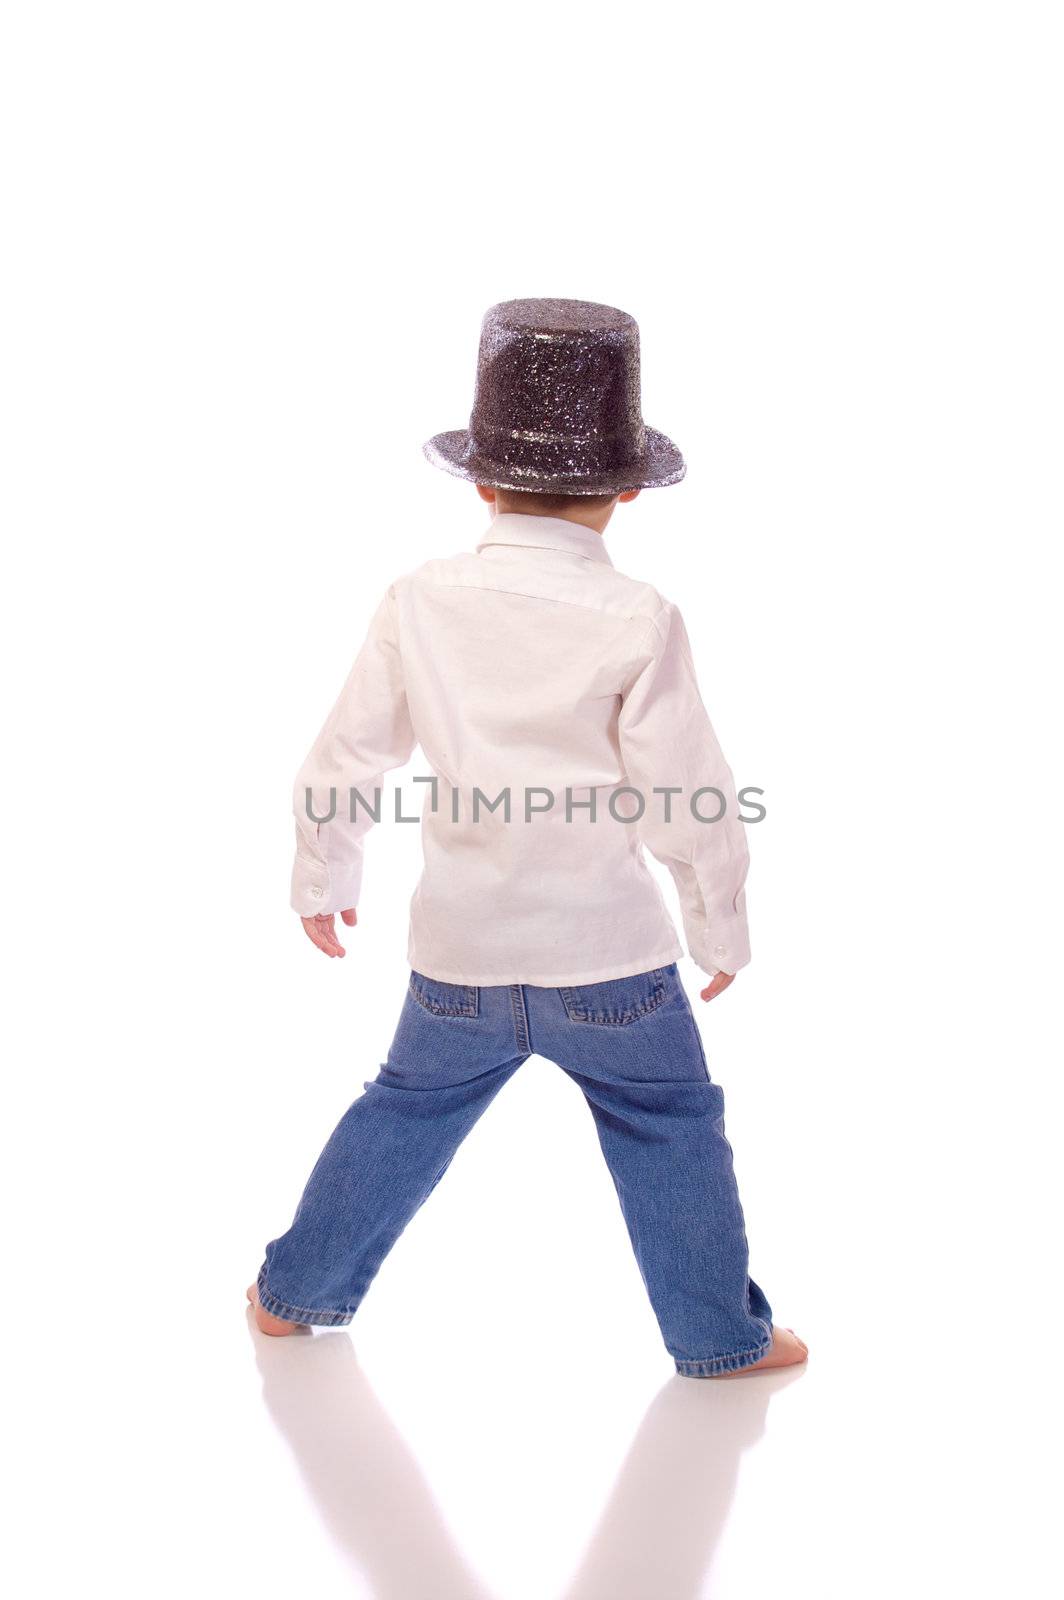 Little boy with a hat dancing